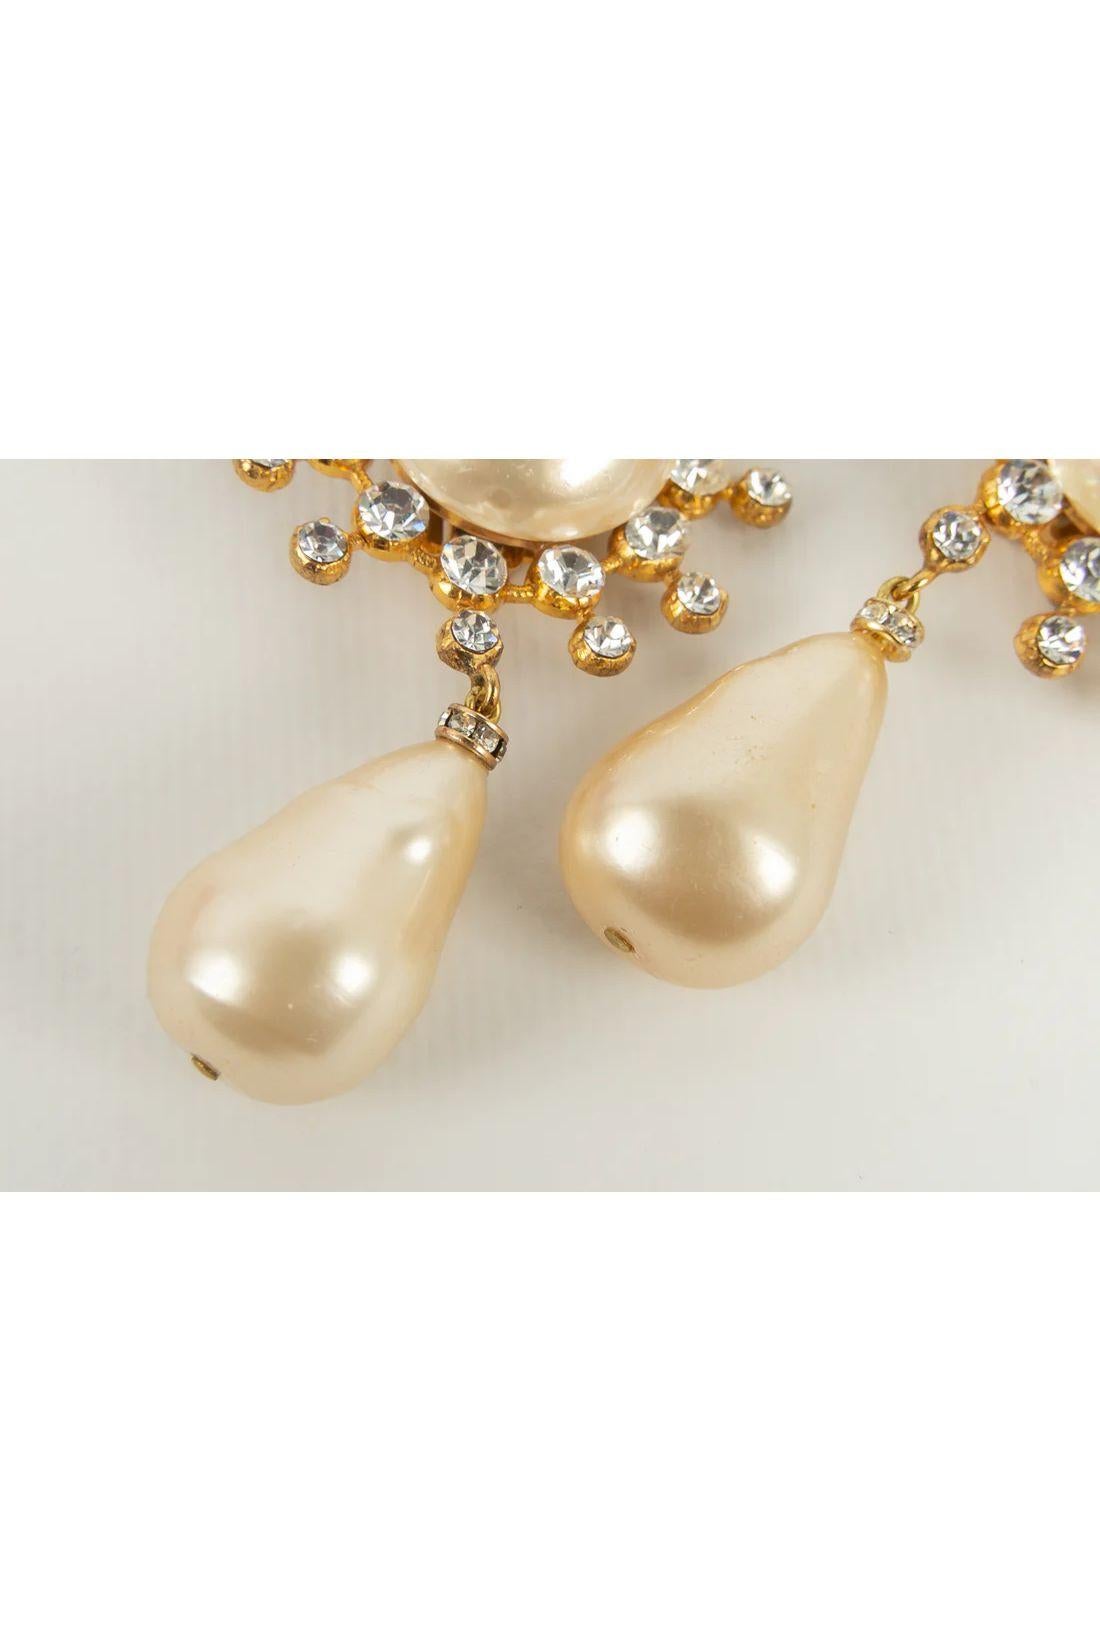 Yves Saint Laurent - (Made in France) Earrings in gold metal, fancy pearl and Swarovski rhinestones. 
To note, some scratches on the pearl.

Additional information:
Dimensions: 7.5 L cm

Condition: 
Very good condition

Seller Ref number: BO51